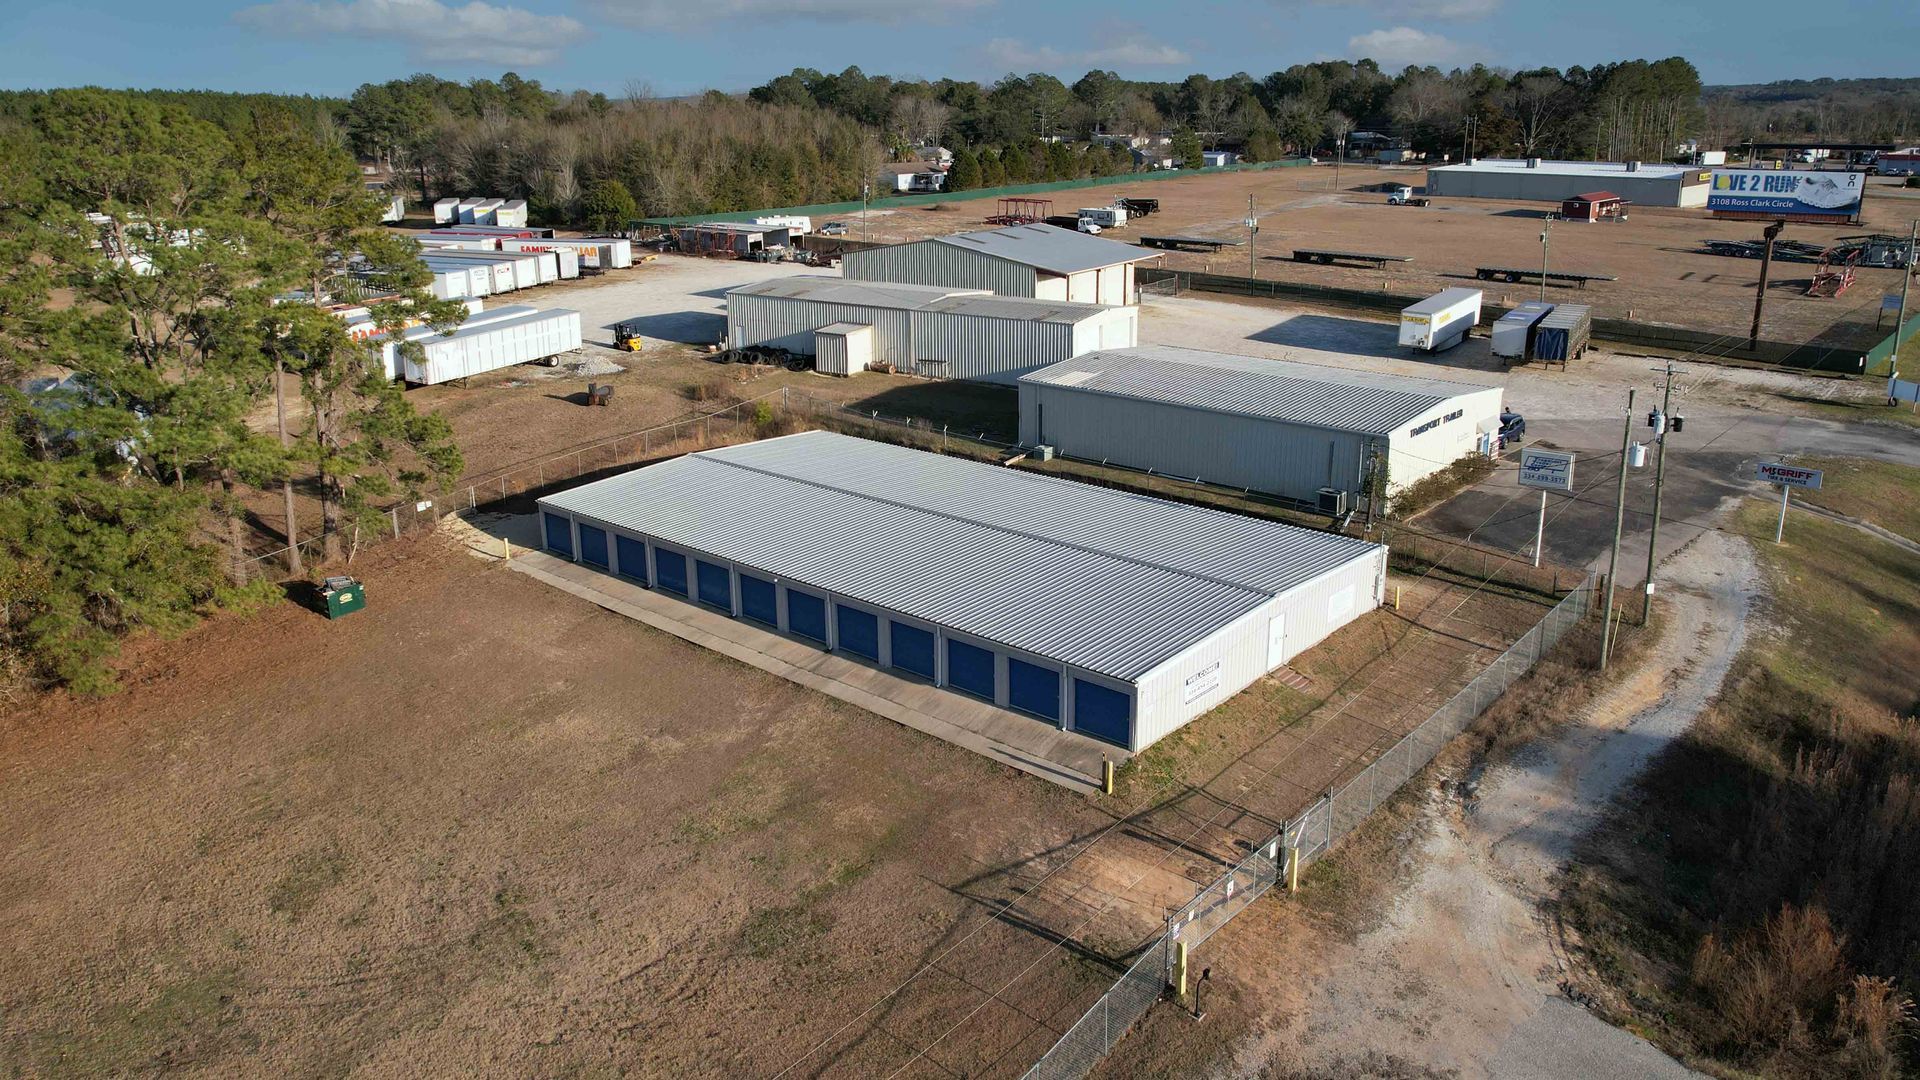 An Aerial View of a fenced storage facility